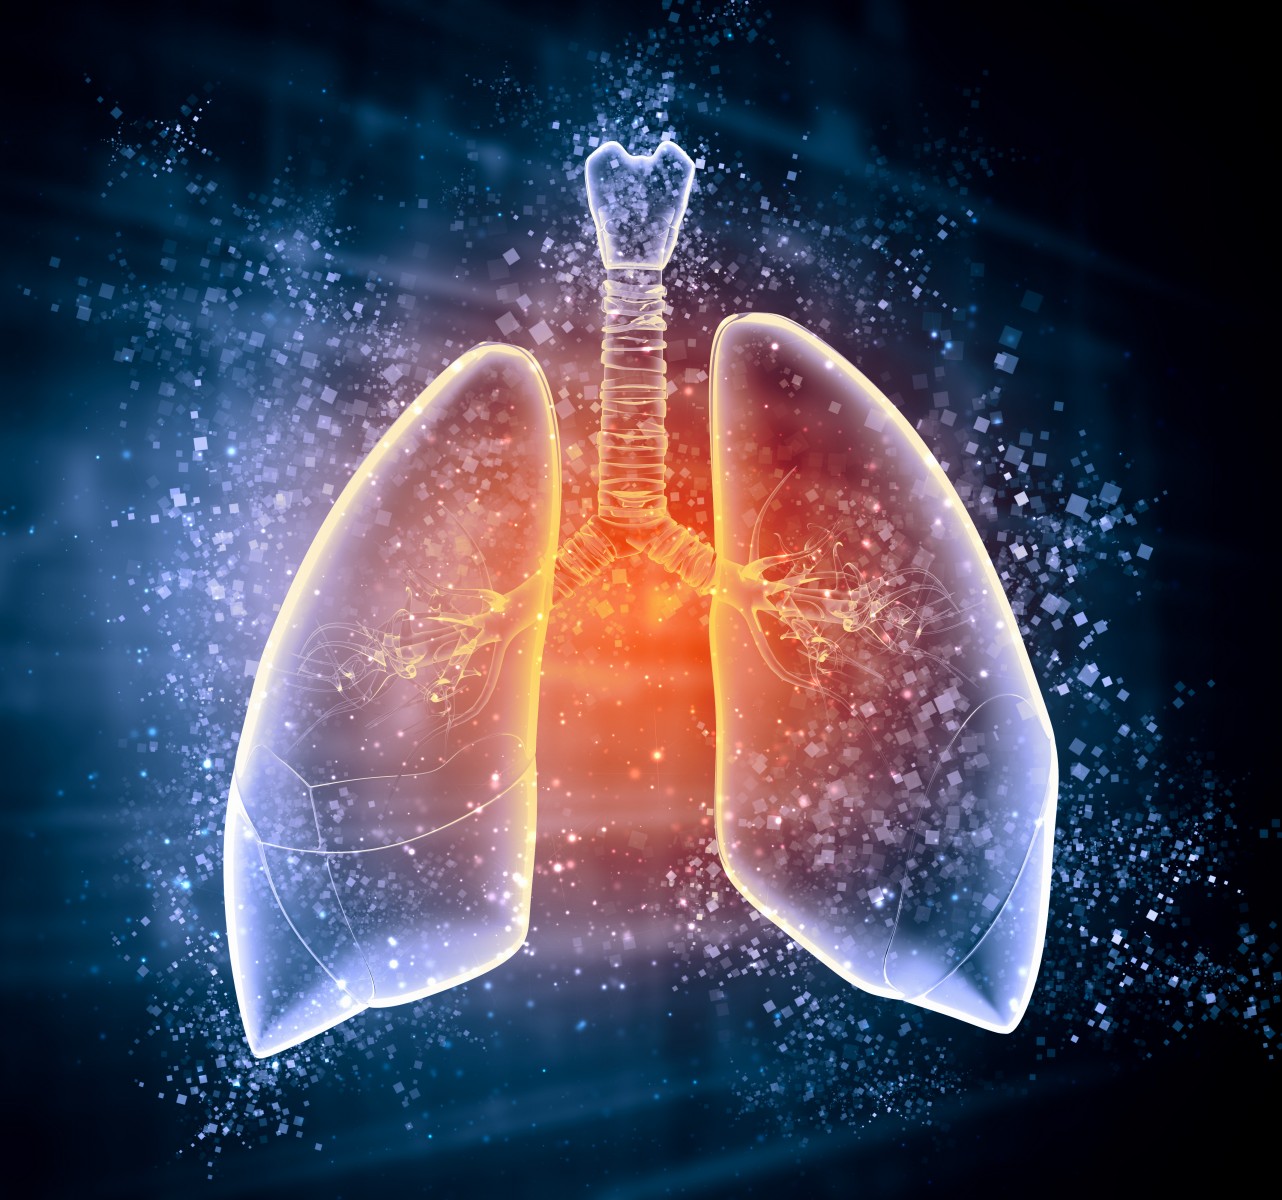 Atezolizumab Shows Benefits in Two Lung Cancer Studies